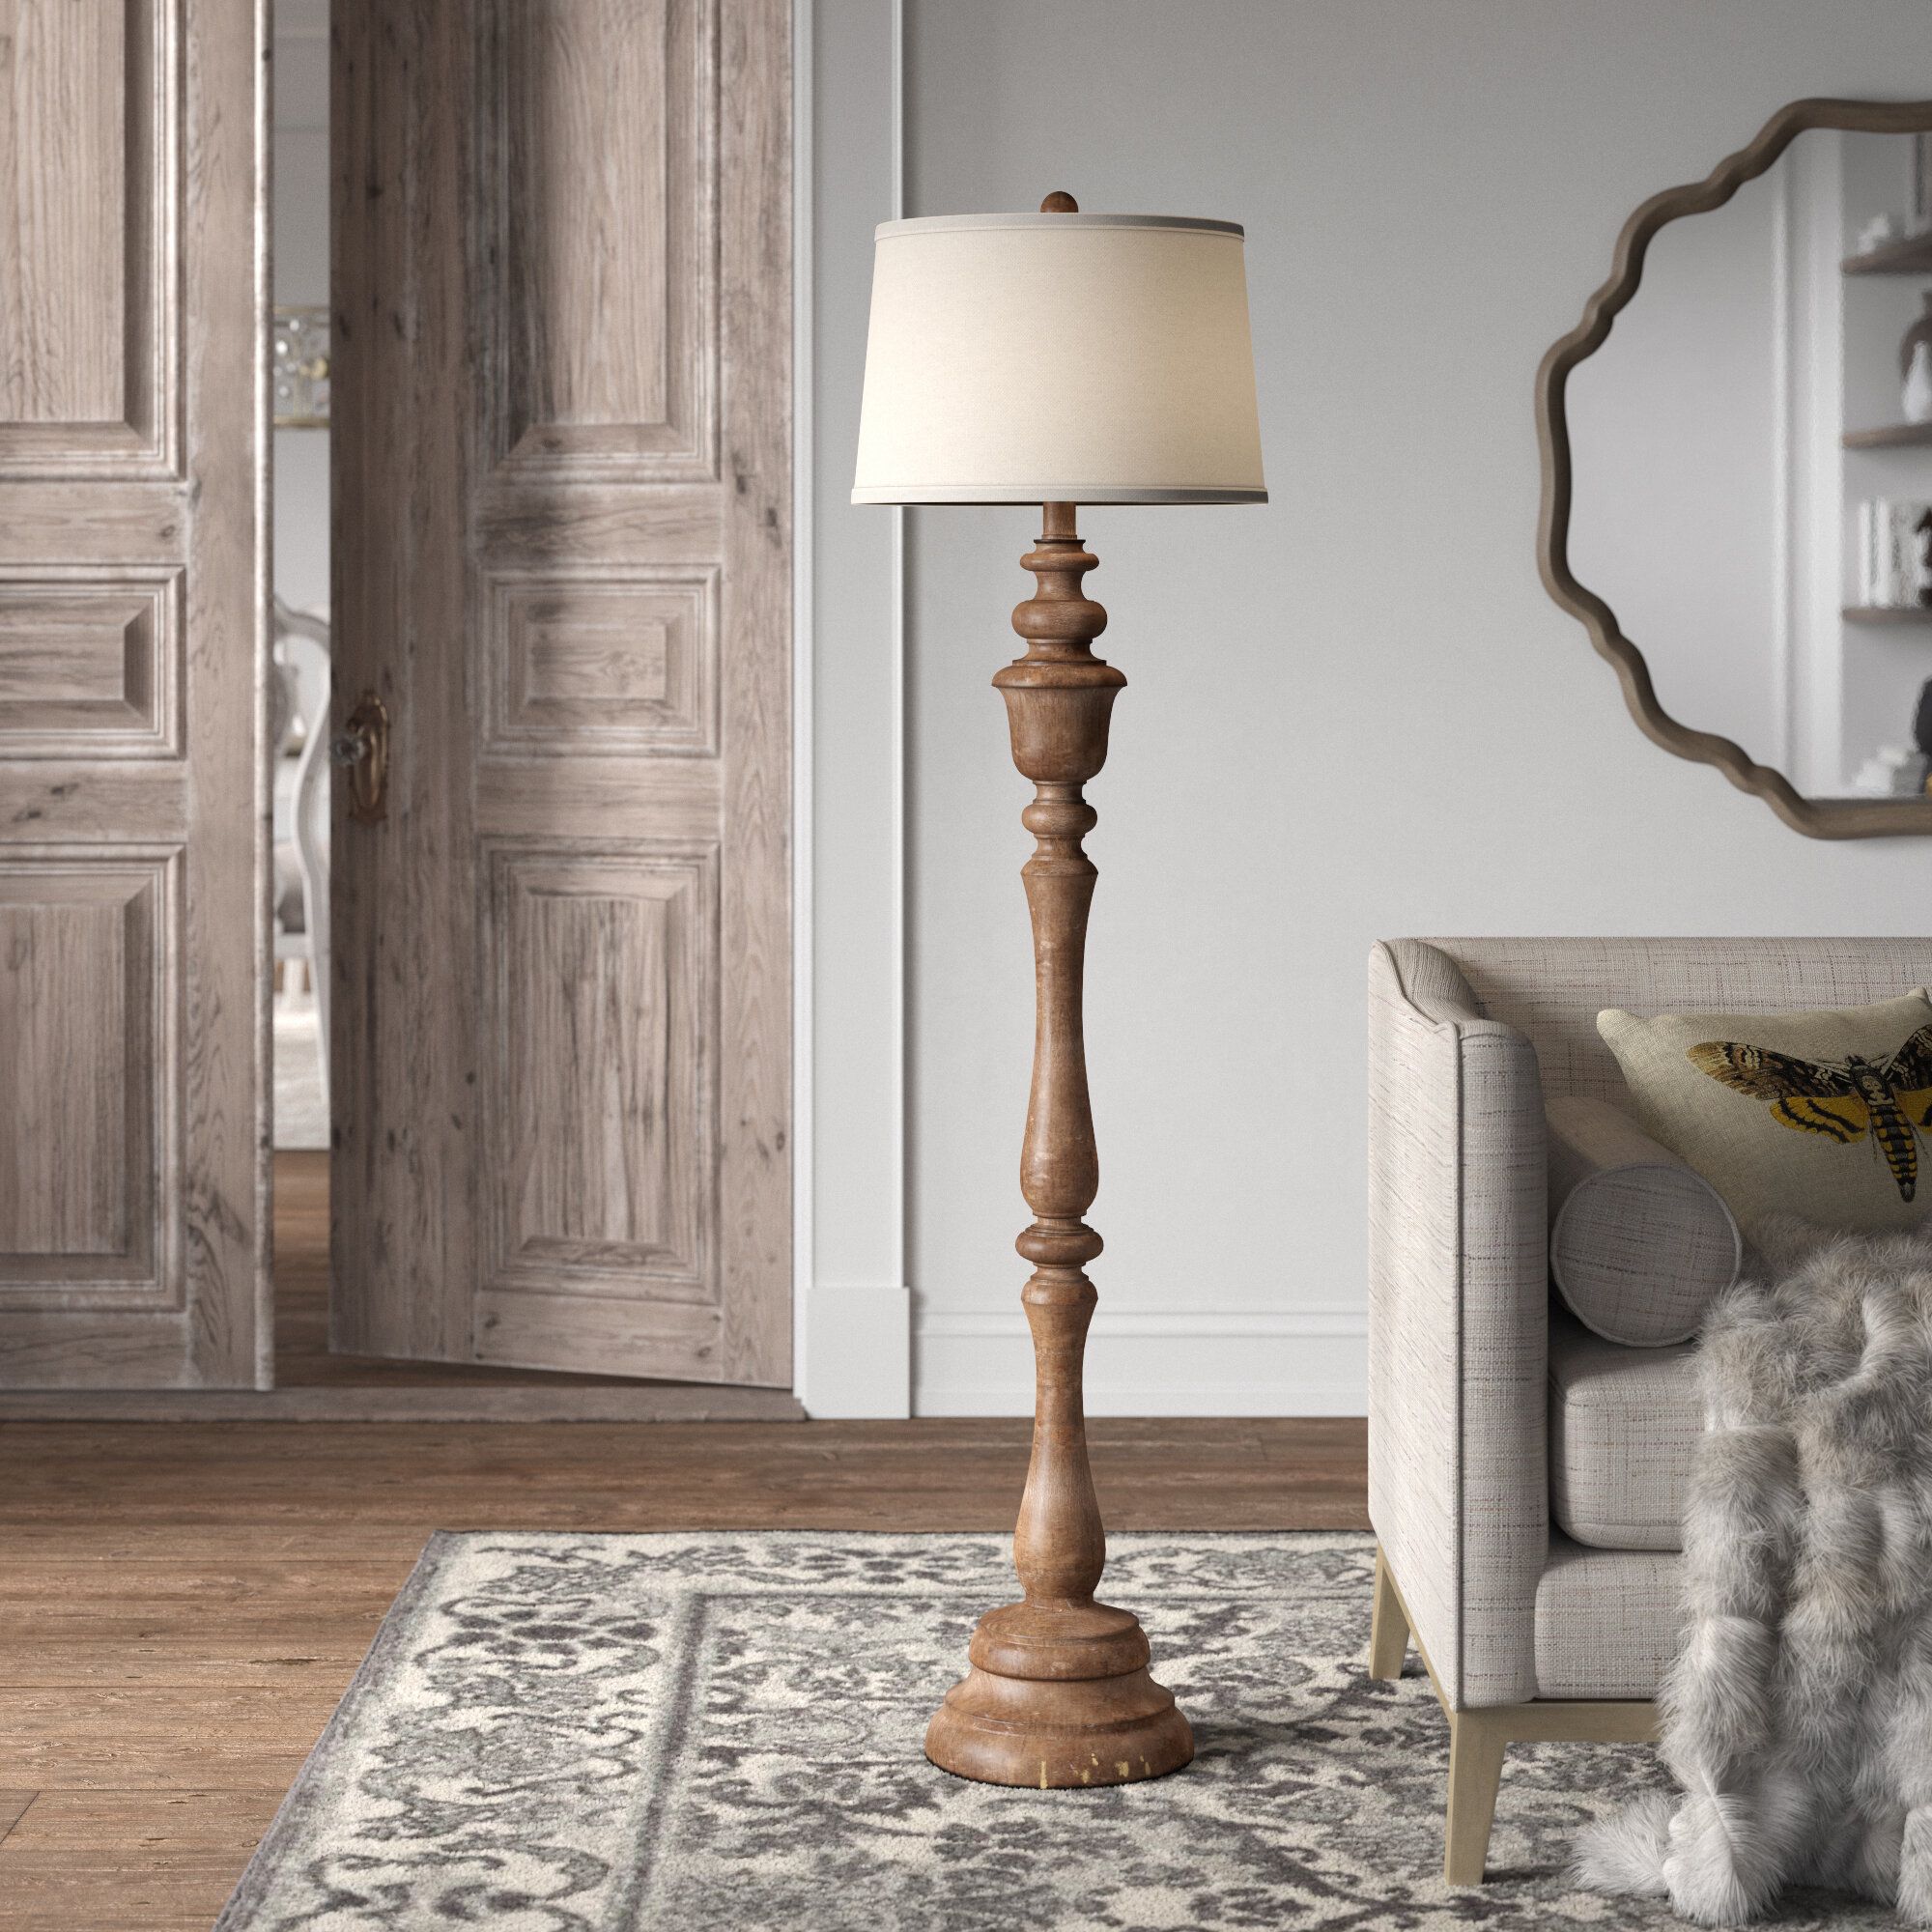 Kelly Clarkson Home Pitch 60" H Traditional Floor Lamp & Reviews | Wayfair Regarding Brown Floor Lamps (View 5 of 15)